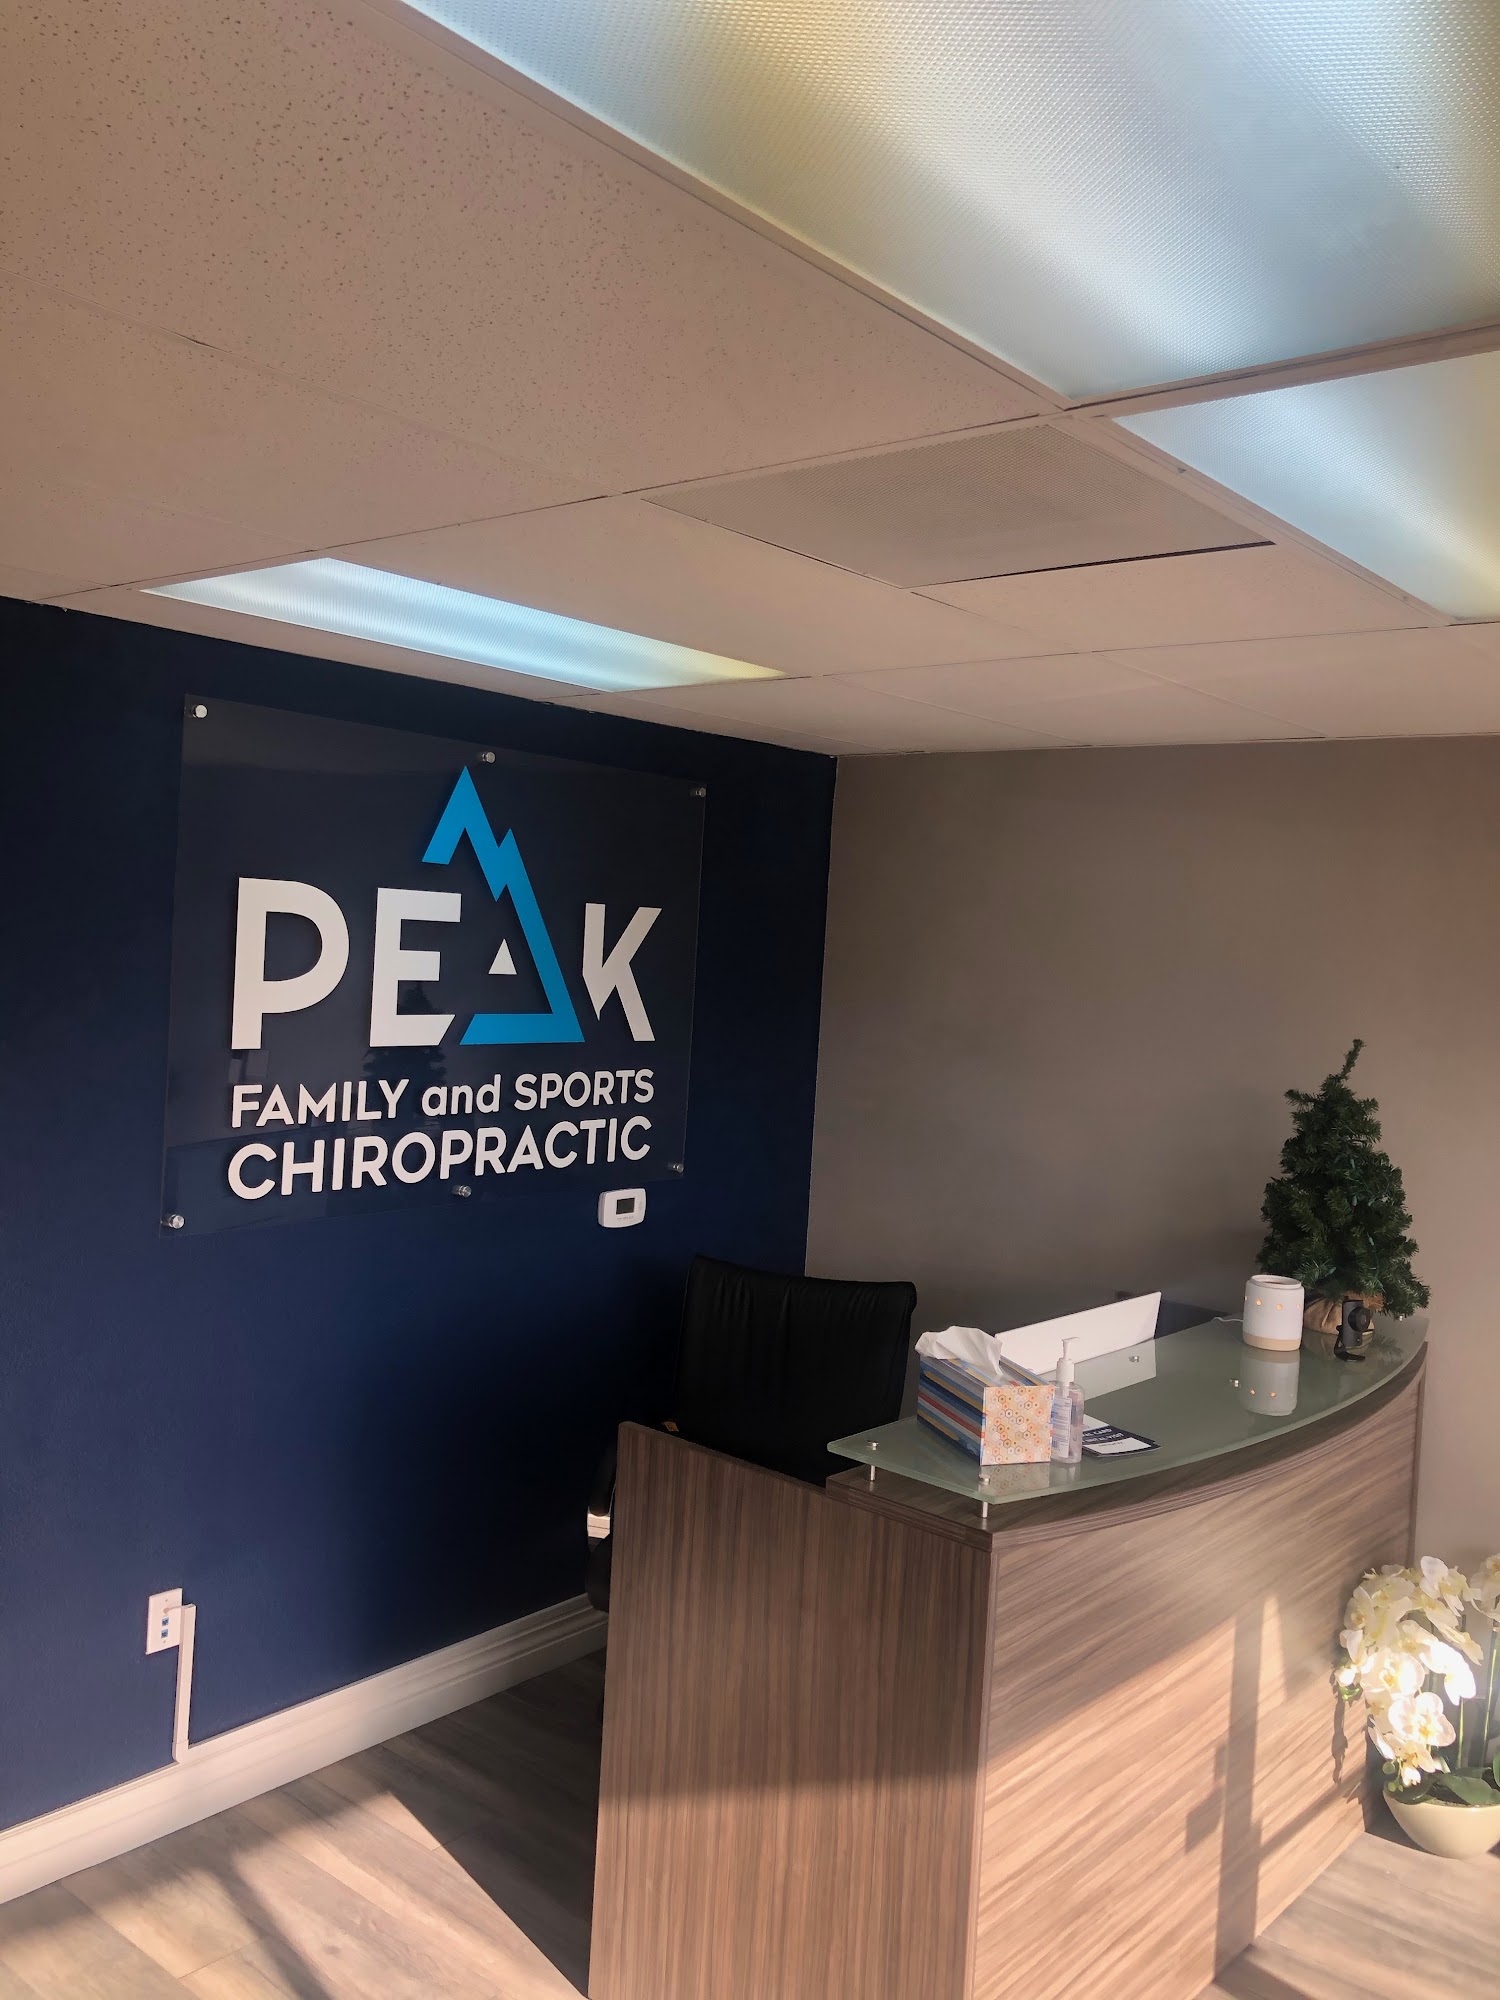 Peak Family and Sports Chiropractic